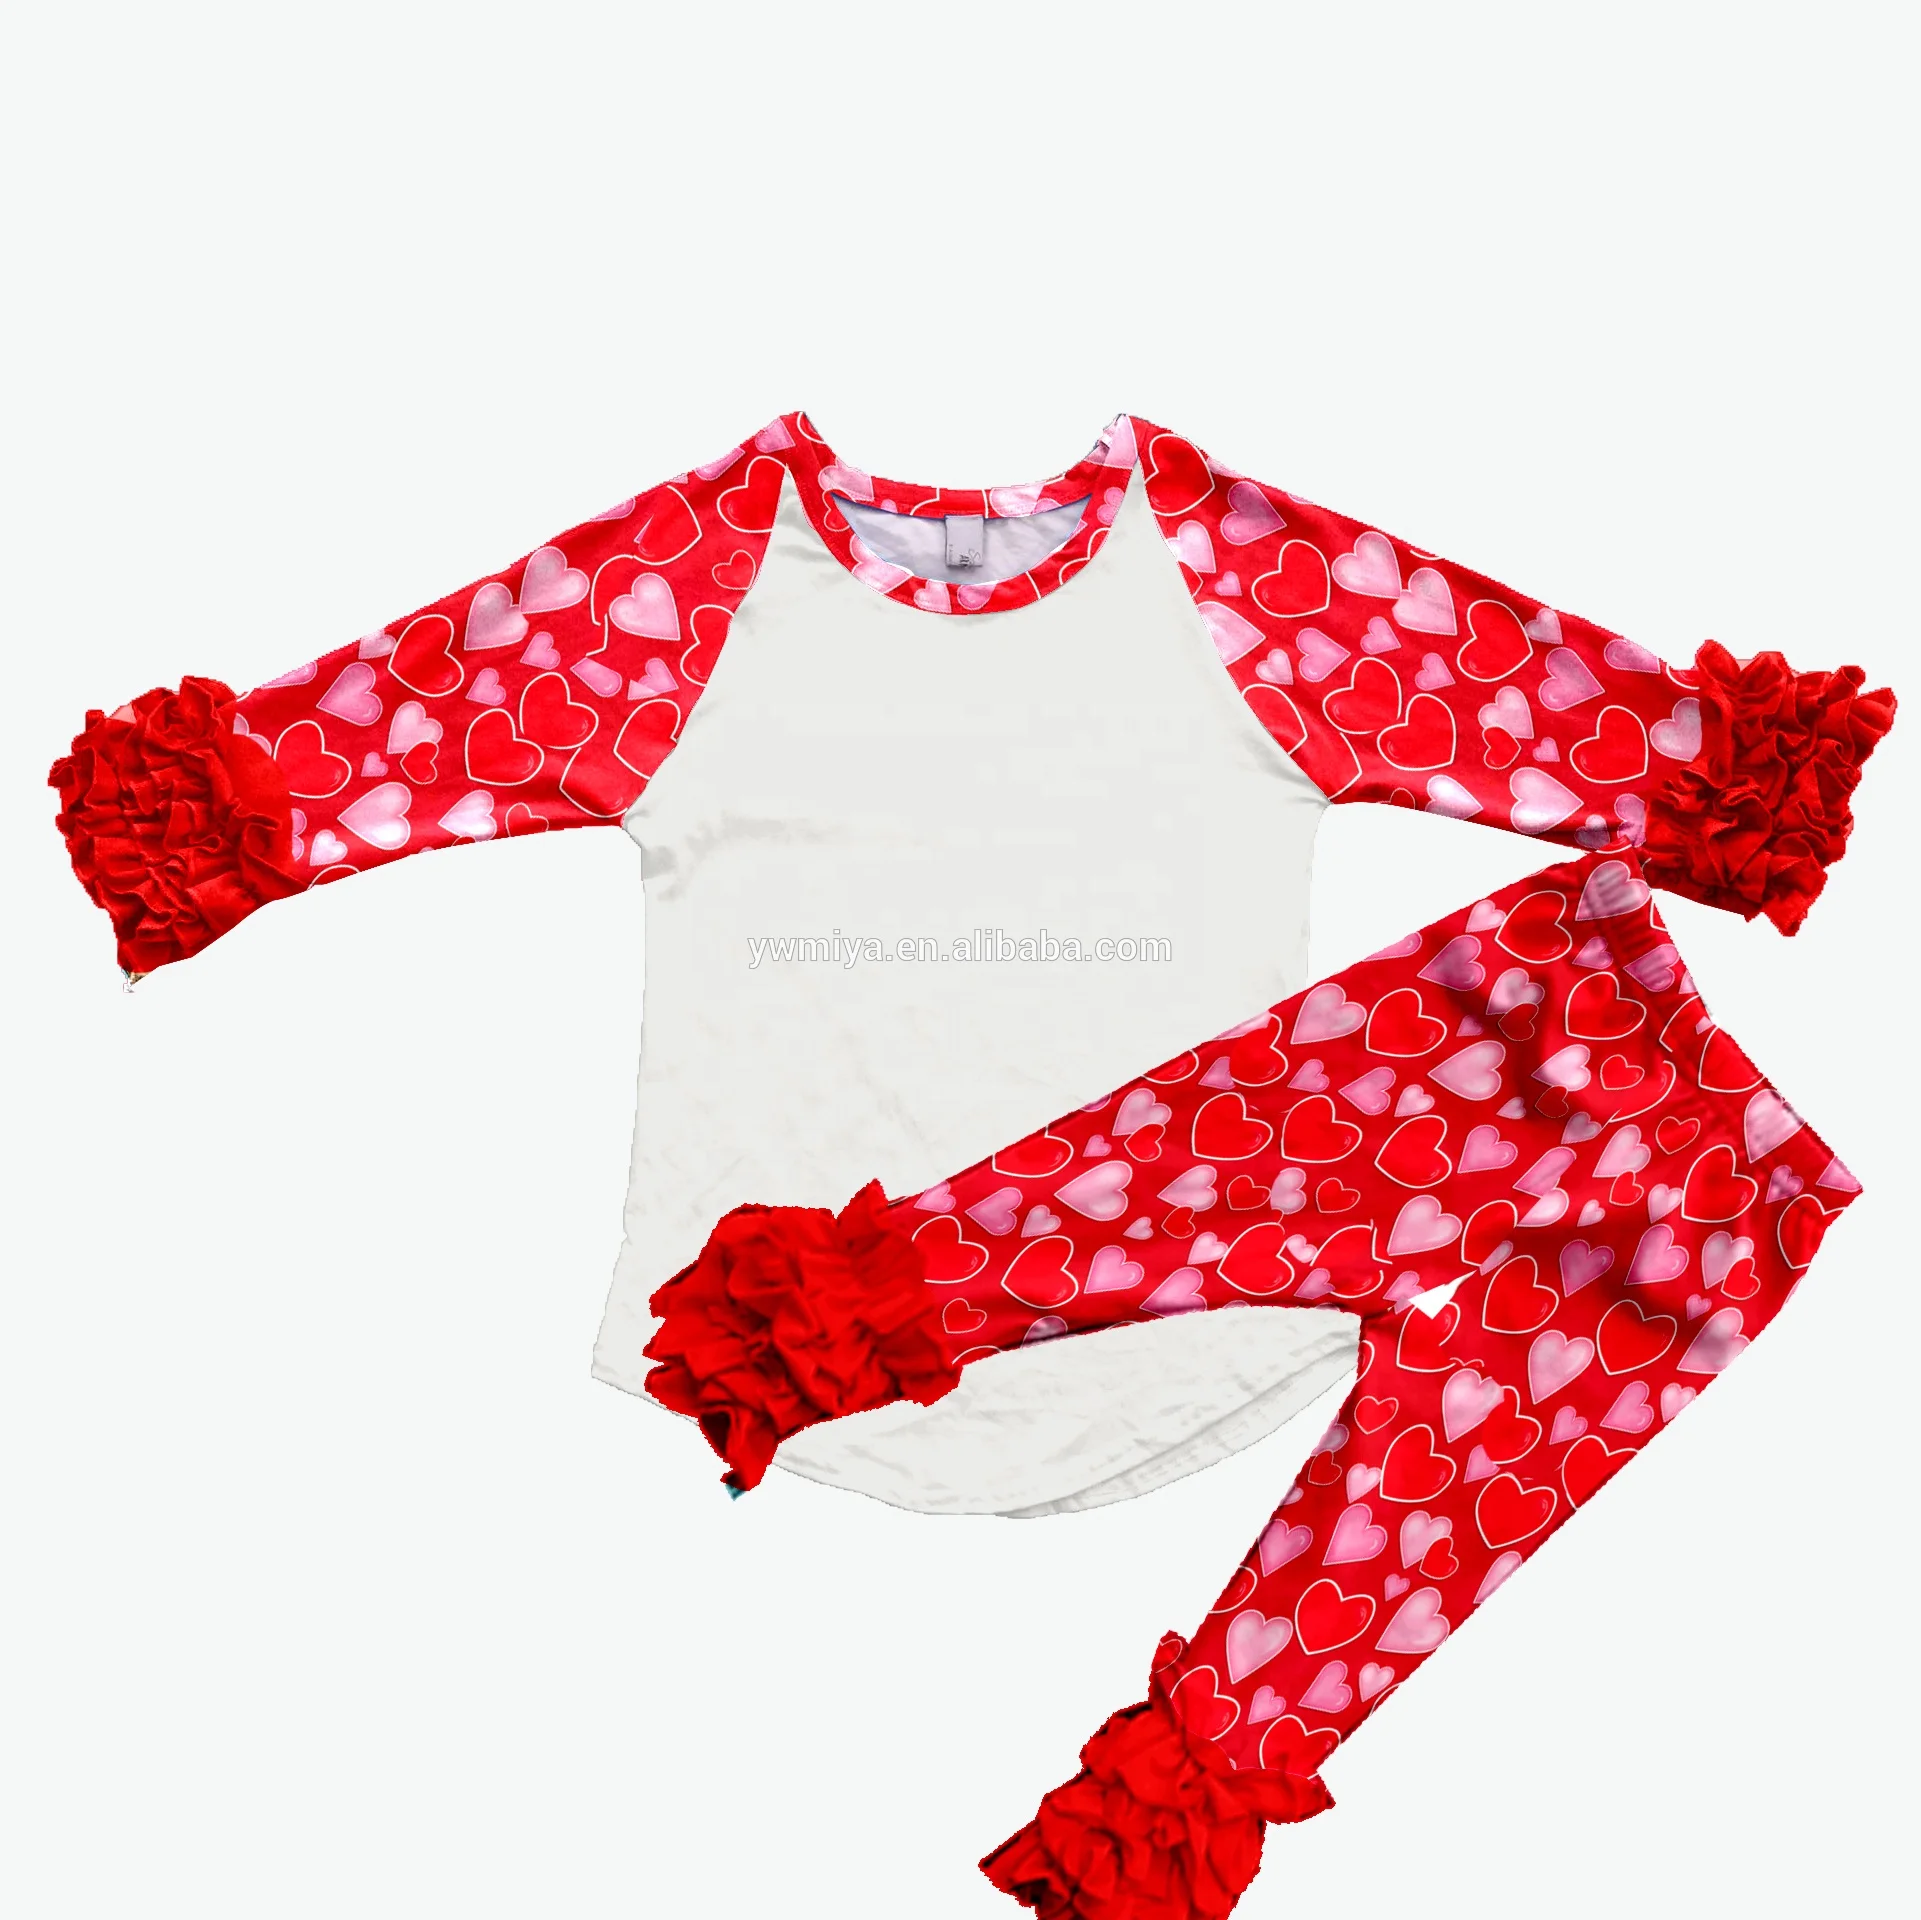 

MY-127 valentines outfits for kids2019 red heart print set icing ruffle valentine's day girls boutique clothing wholesale, Picture show;you can contact us for more patterns